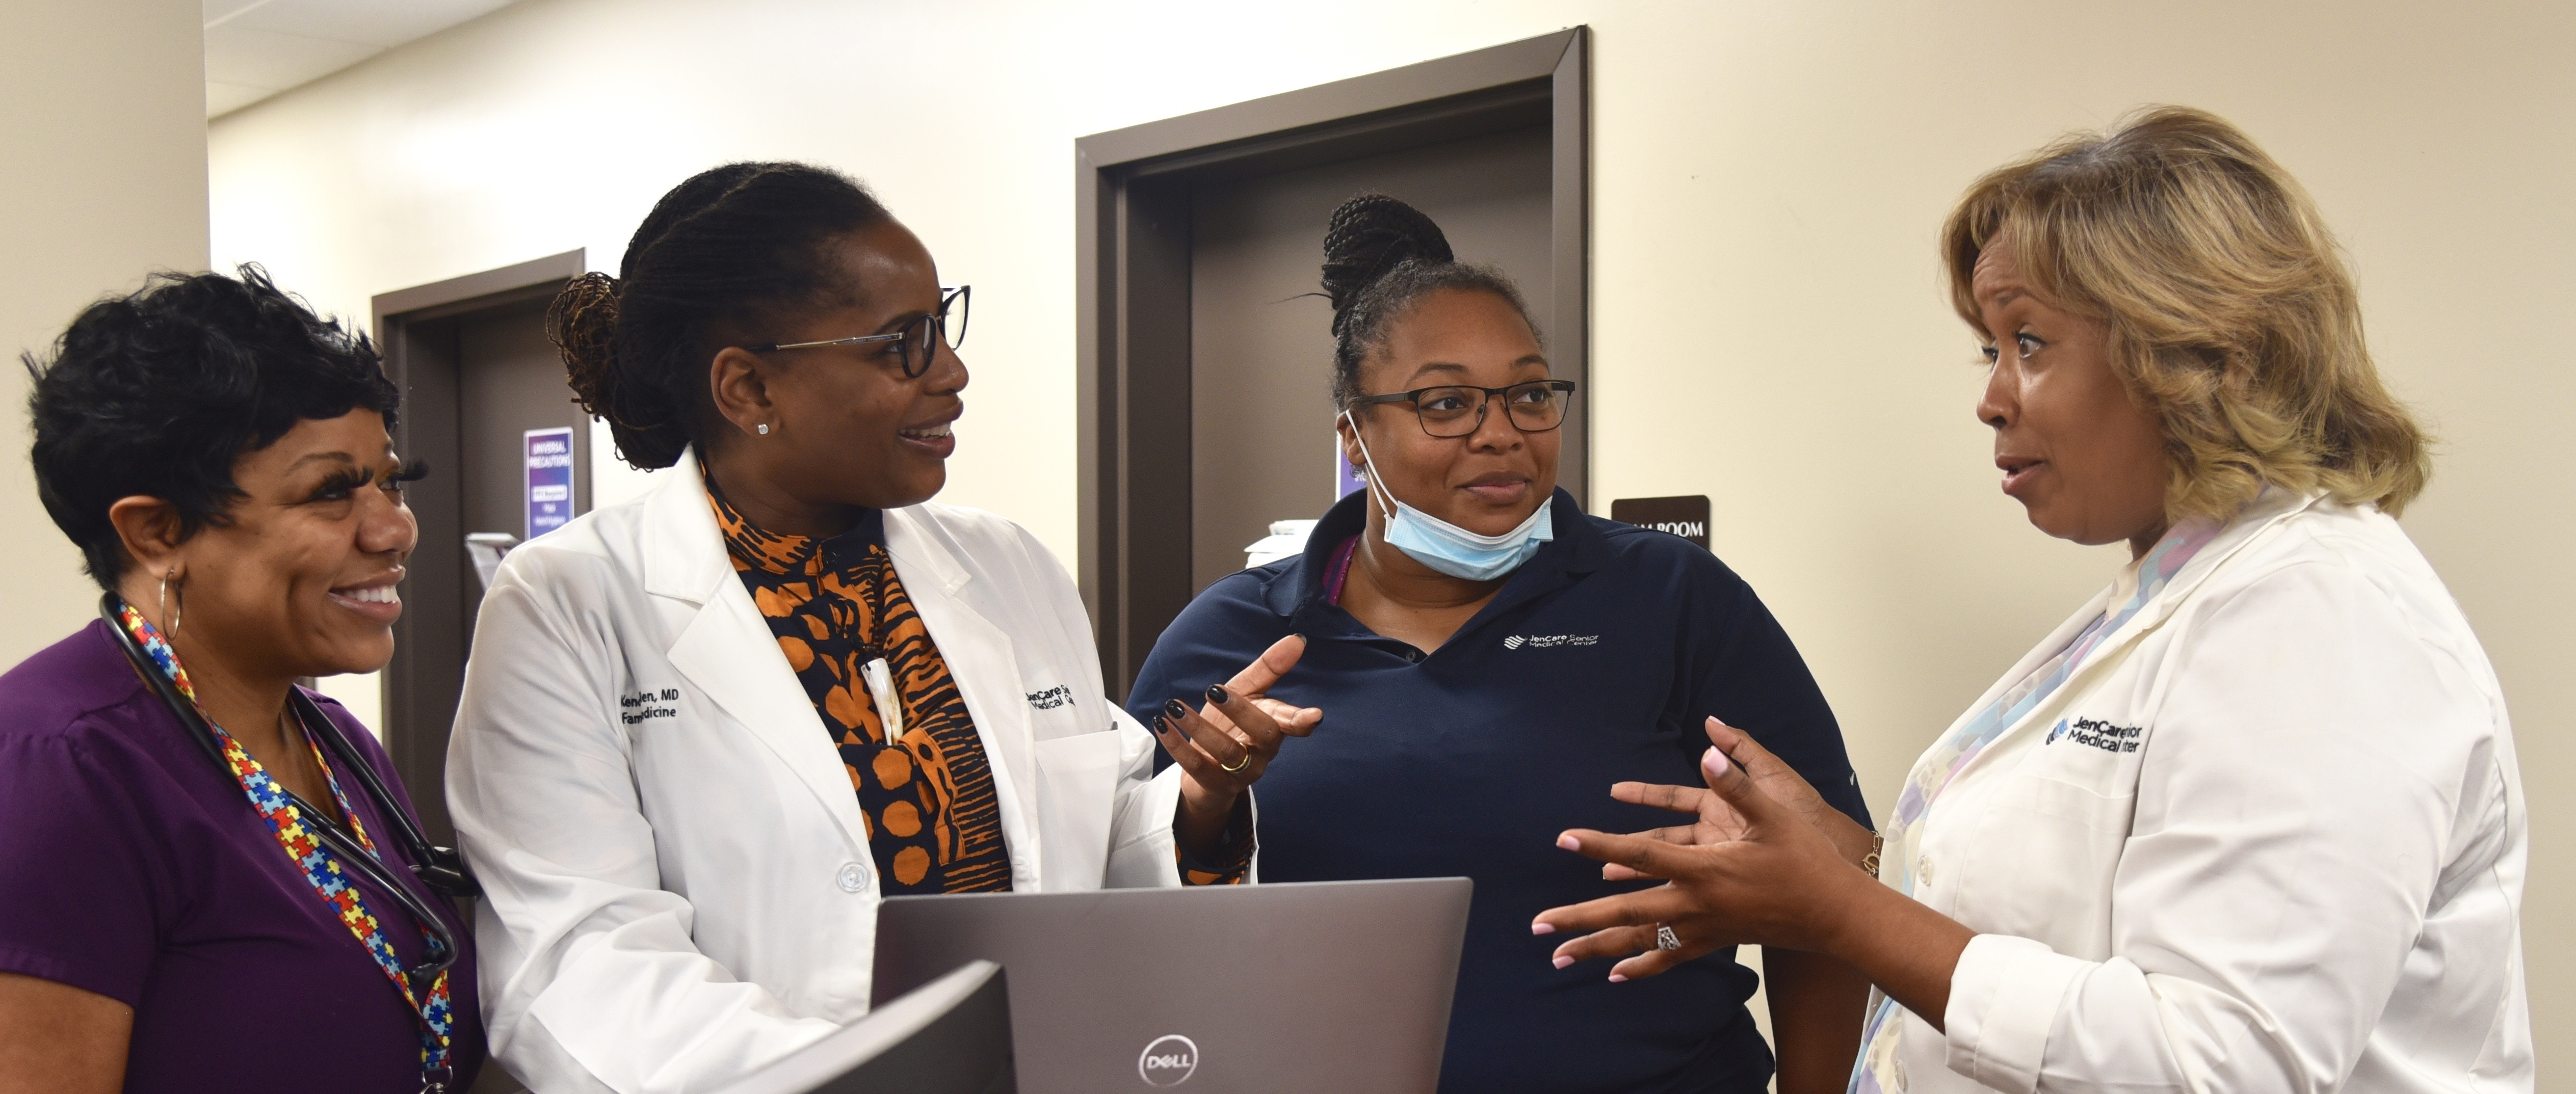 Lisa Price Stevens, M’93 (far right), combined her administrative skills and health care policy experience with a return to clinical practice in February 2020 as regional chief medical officer for JenCare. (Photo courtesy of ChenMed)